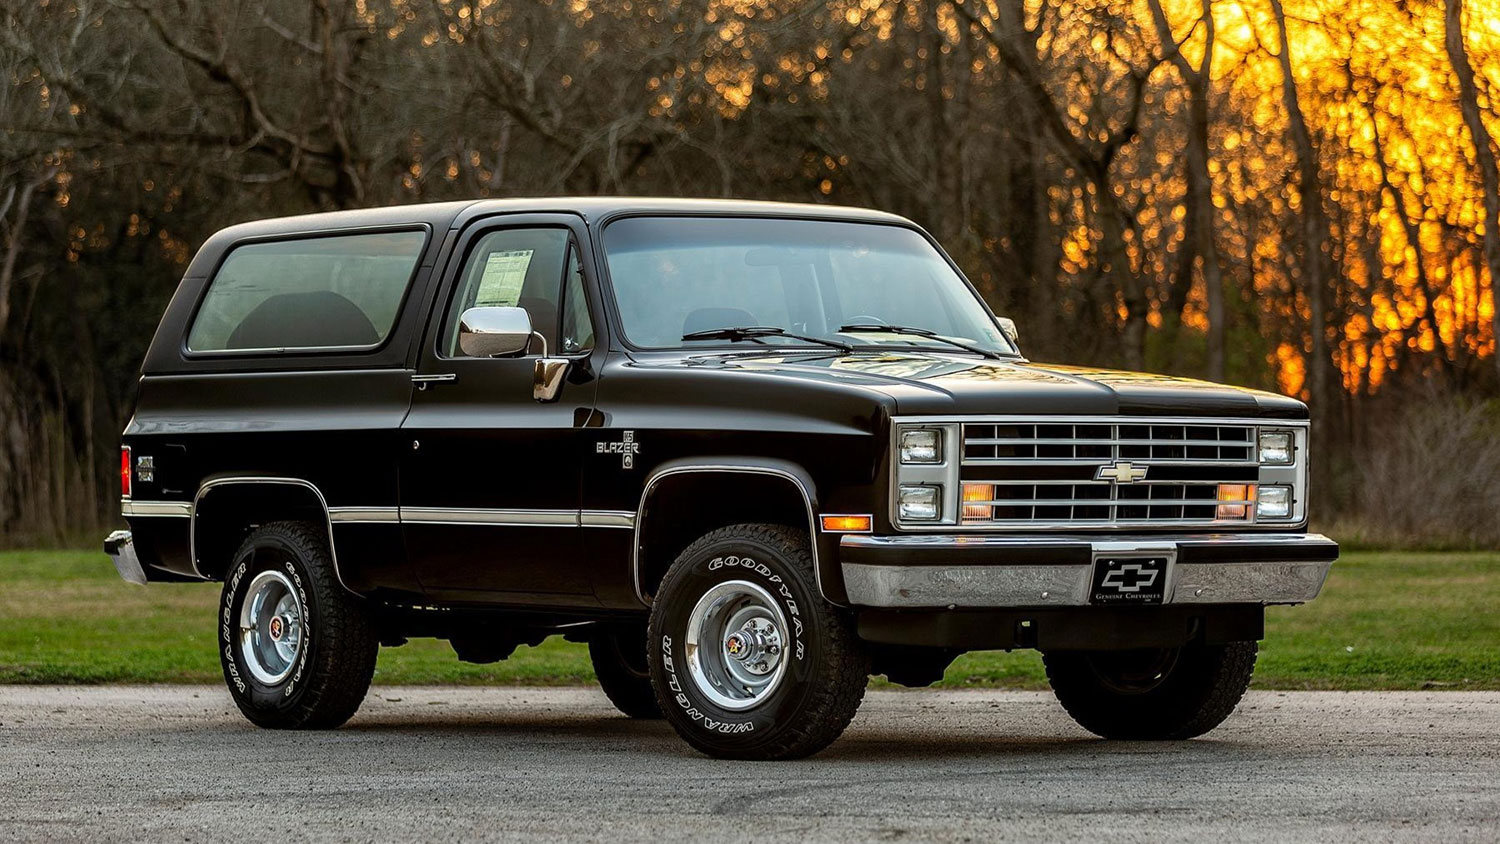 Four Thousand Mile 1987 Chevy K5 Blazer Up For Auction